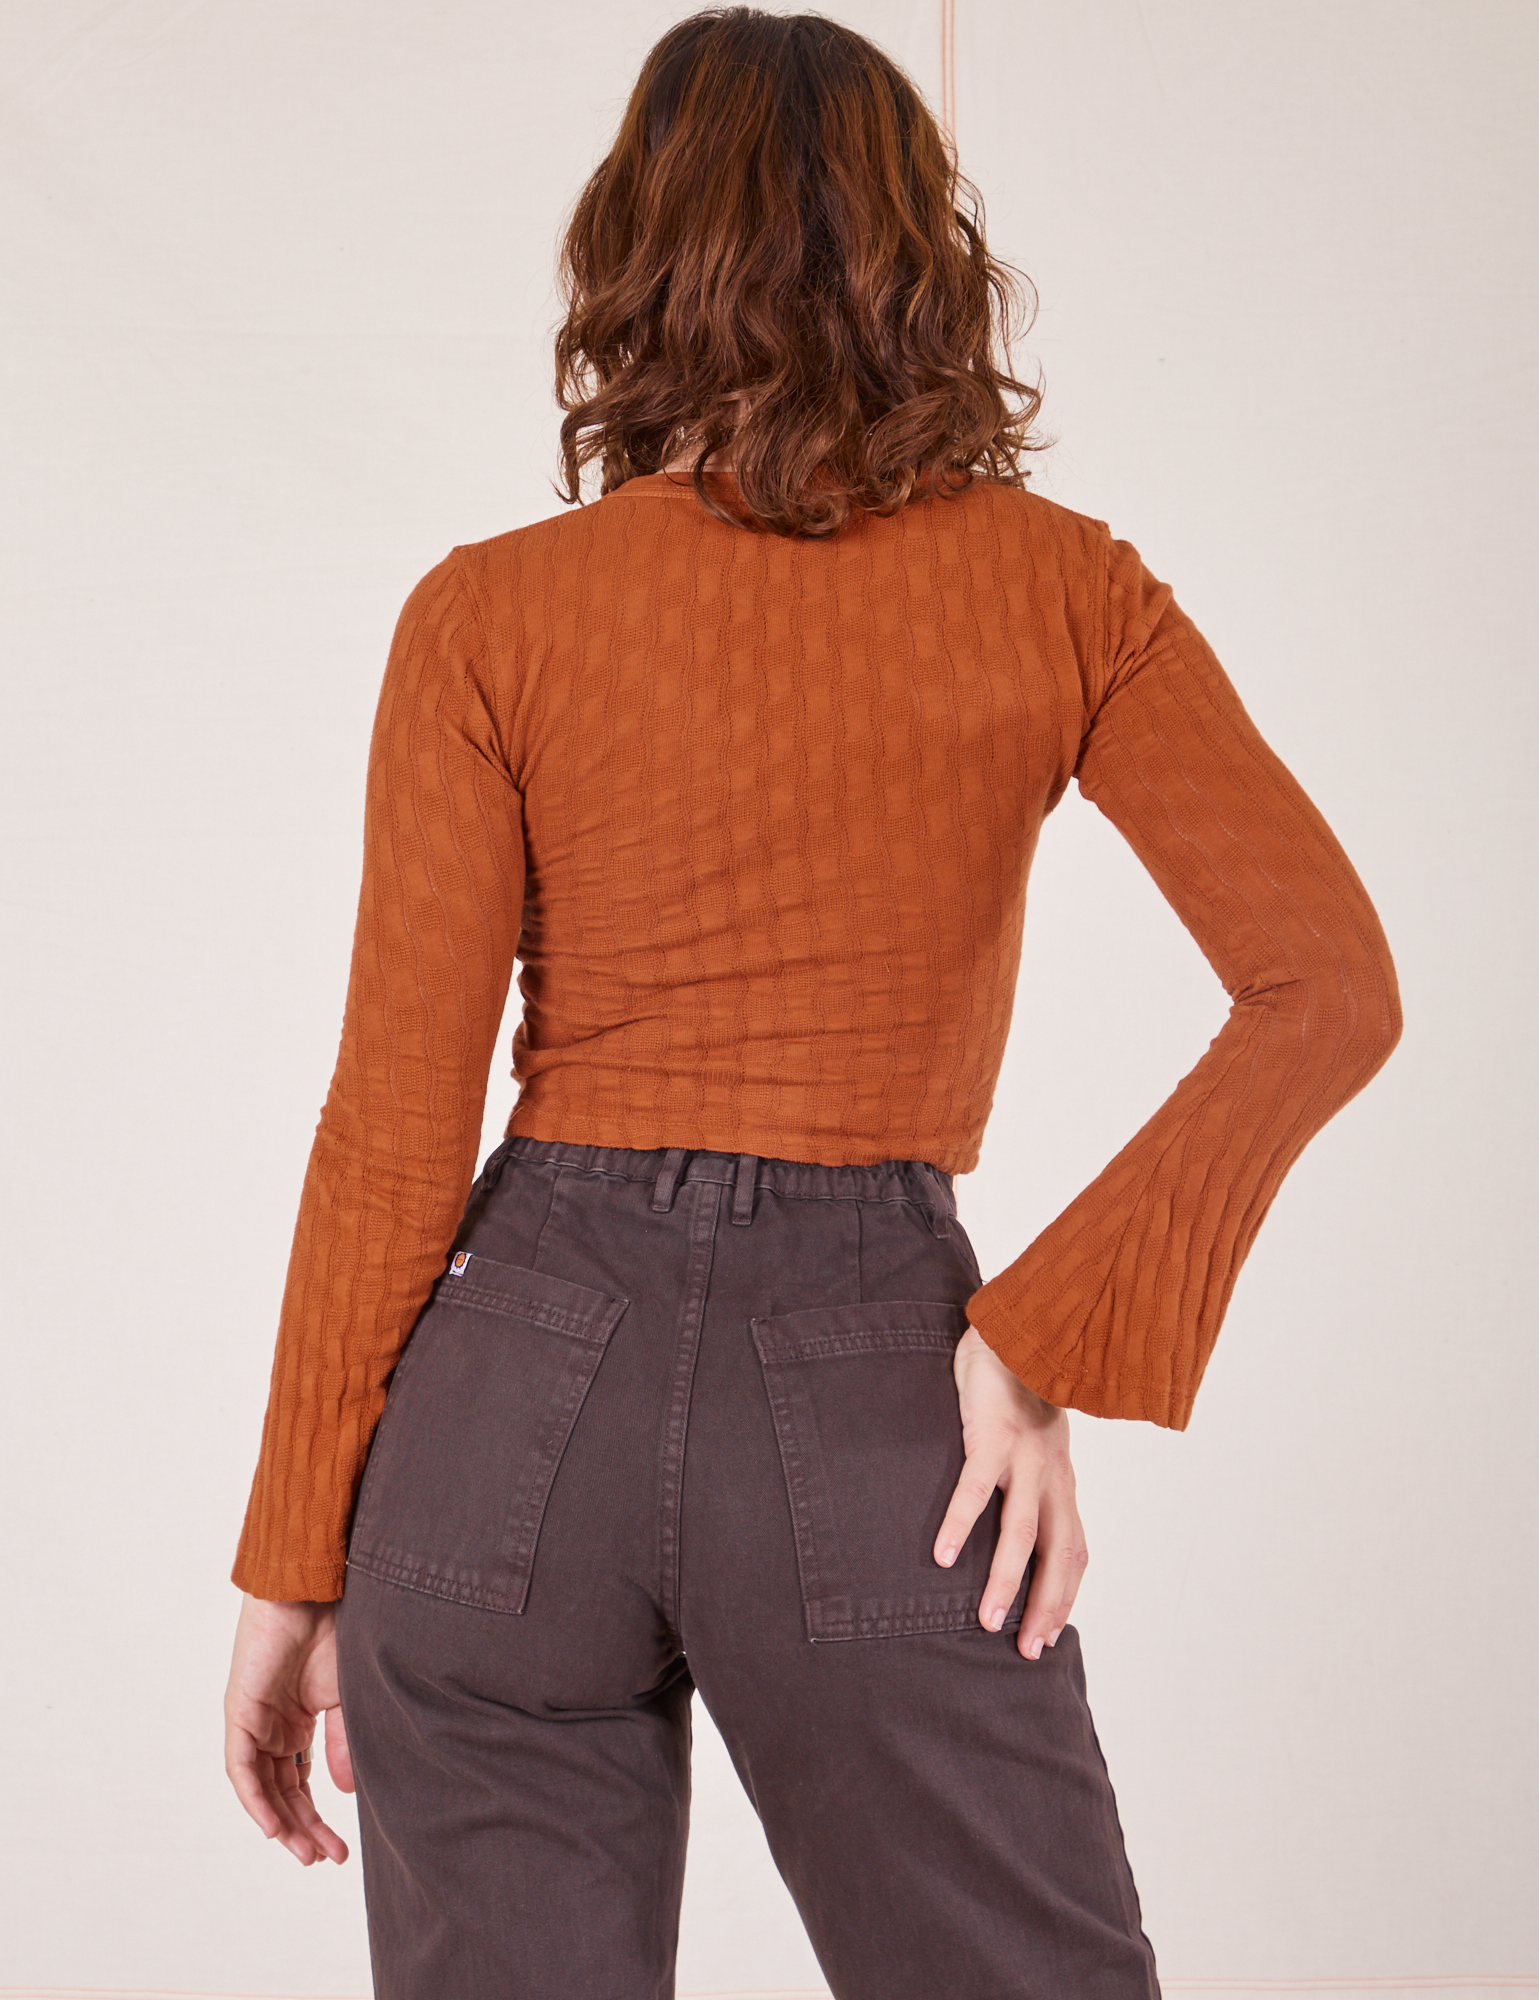 Back view of Bell Sleeve Top in Burnt Terracotta and espresso brown Western Pants